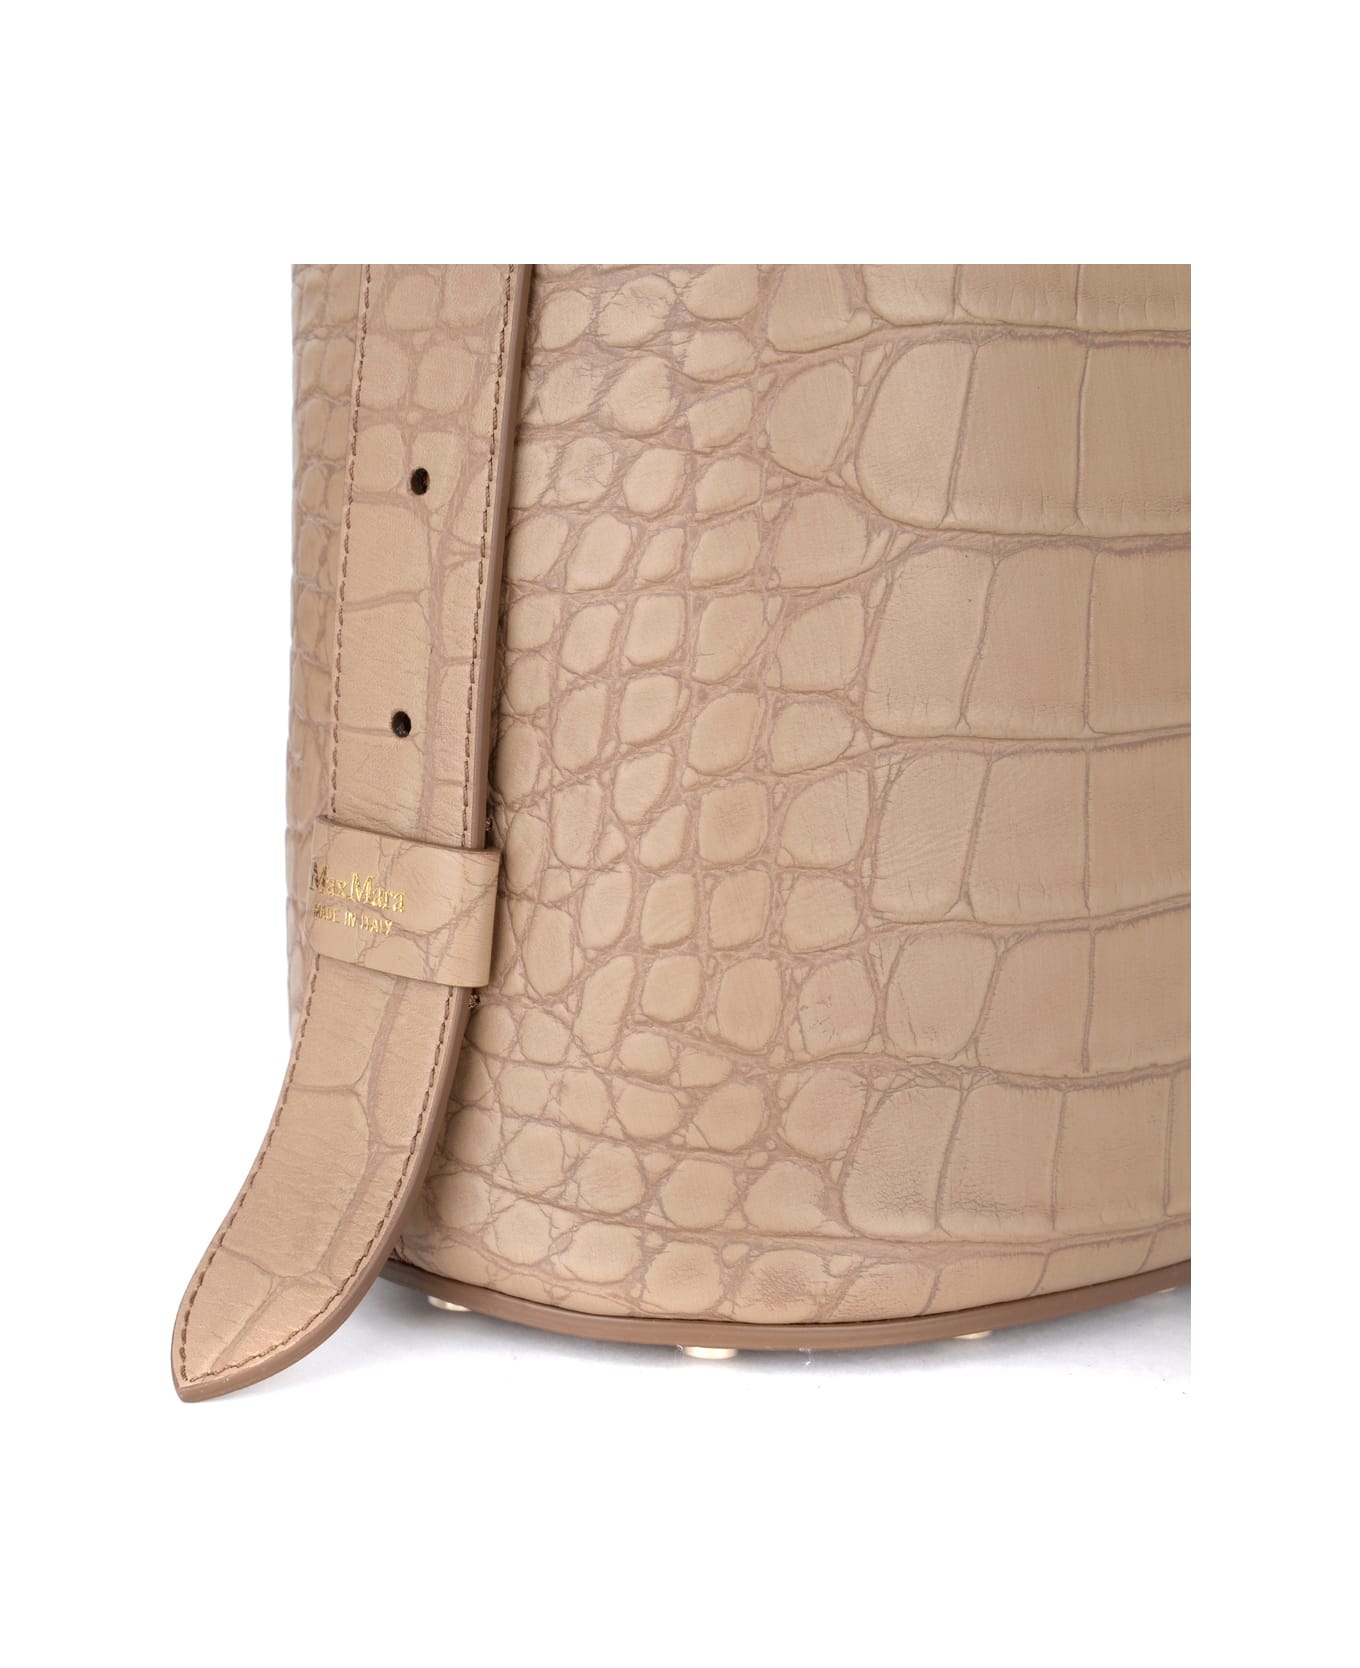 Max Mara large Bag In Camel Color Leather With Crocodile Effect - CAMEL